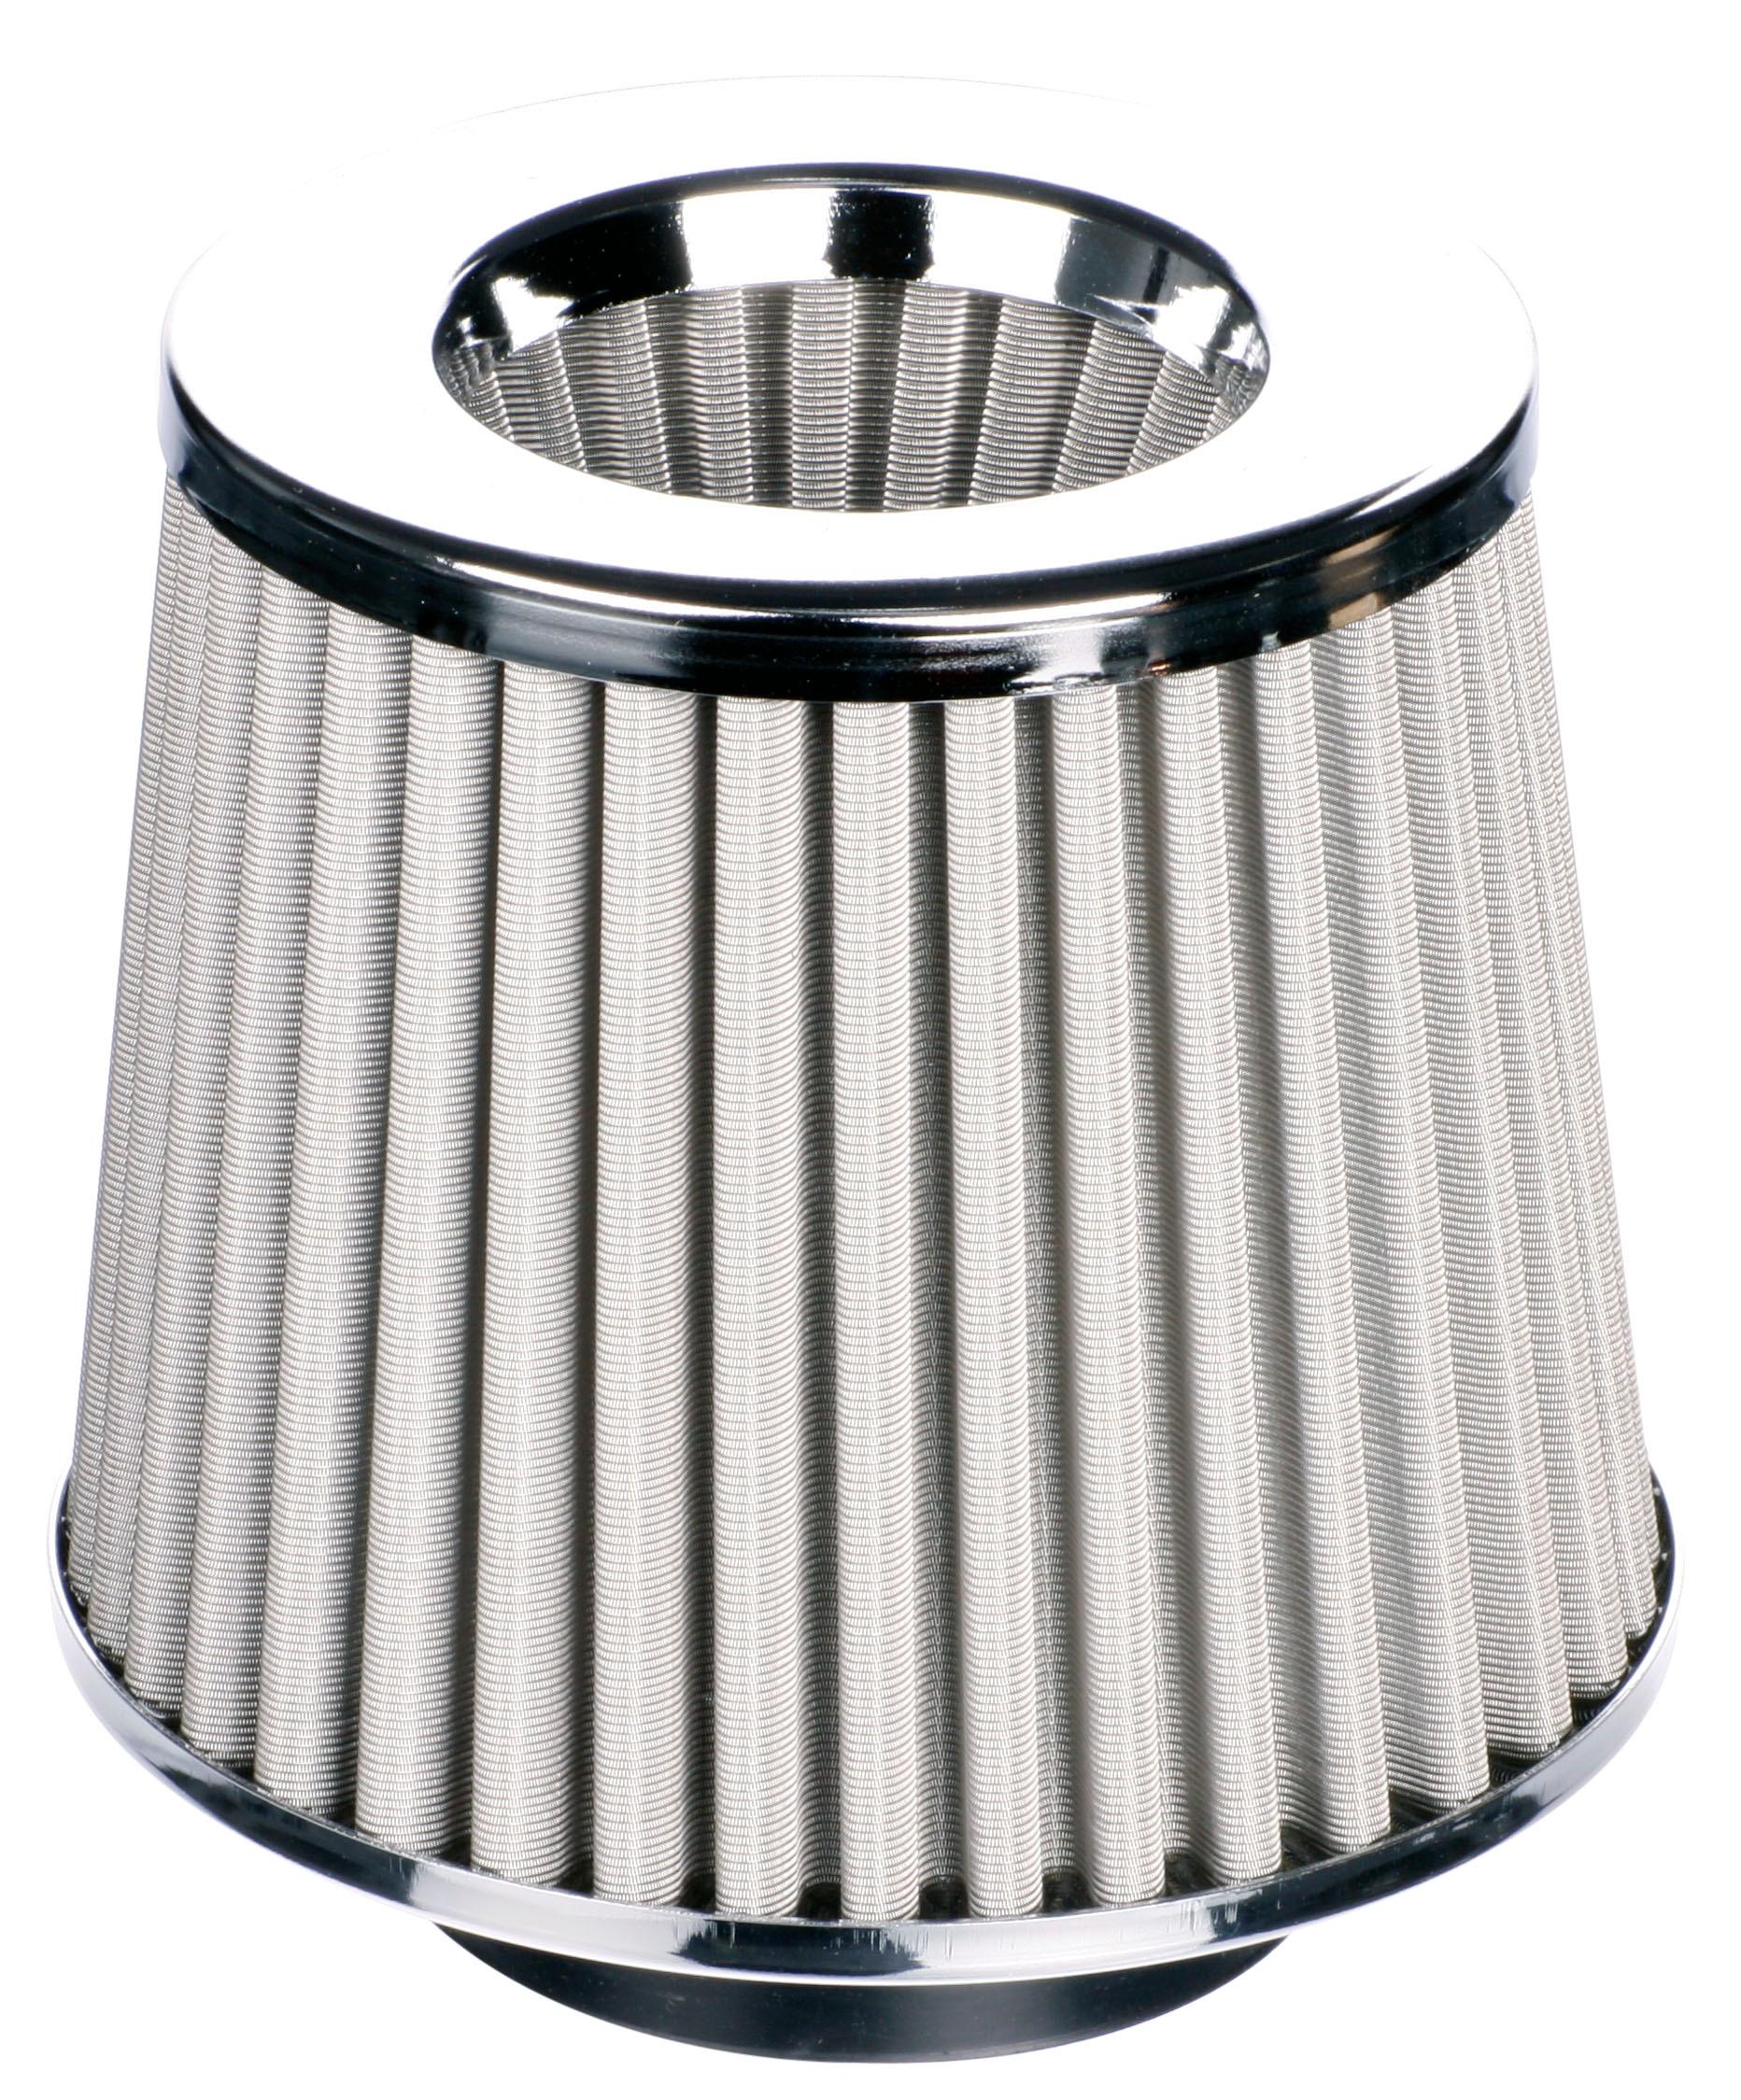 Ripspeed Universal Filter - Stainless Steel